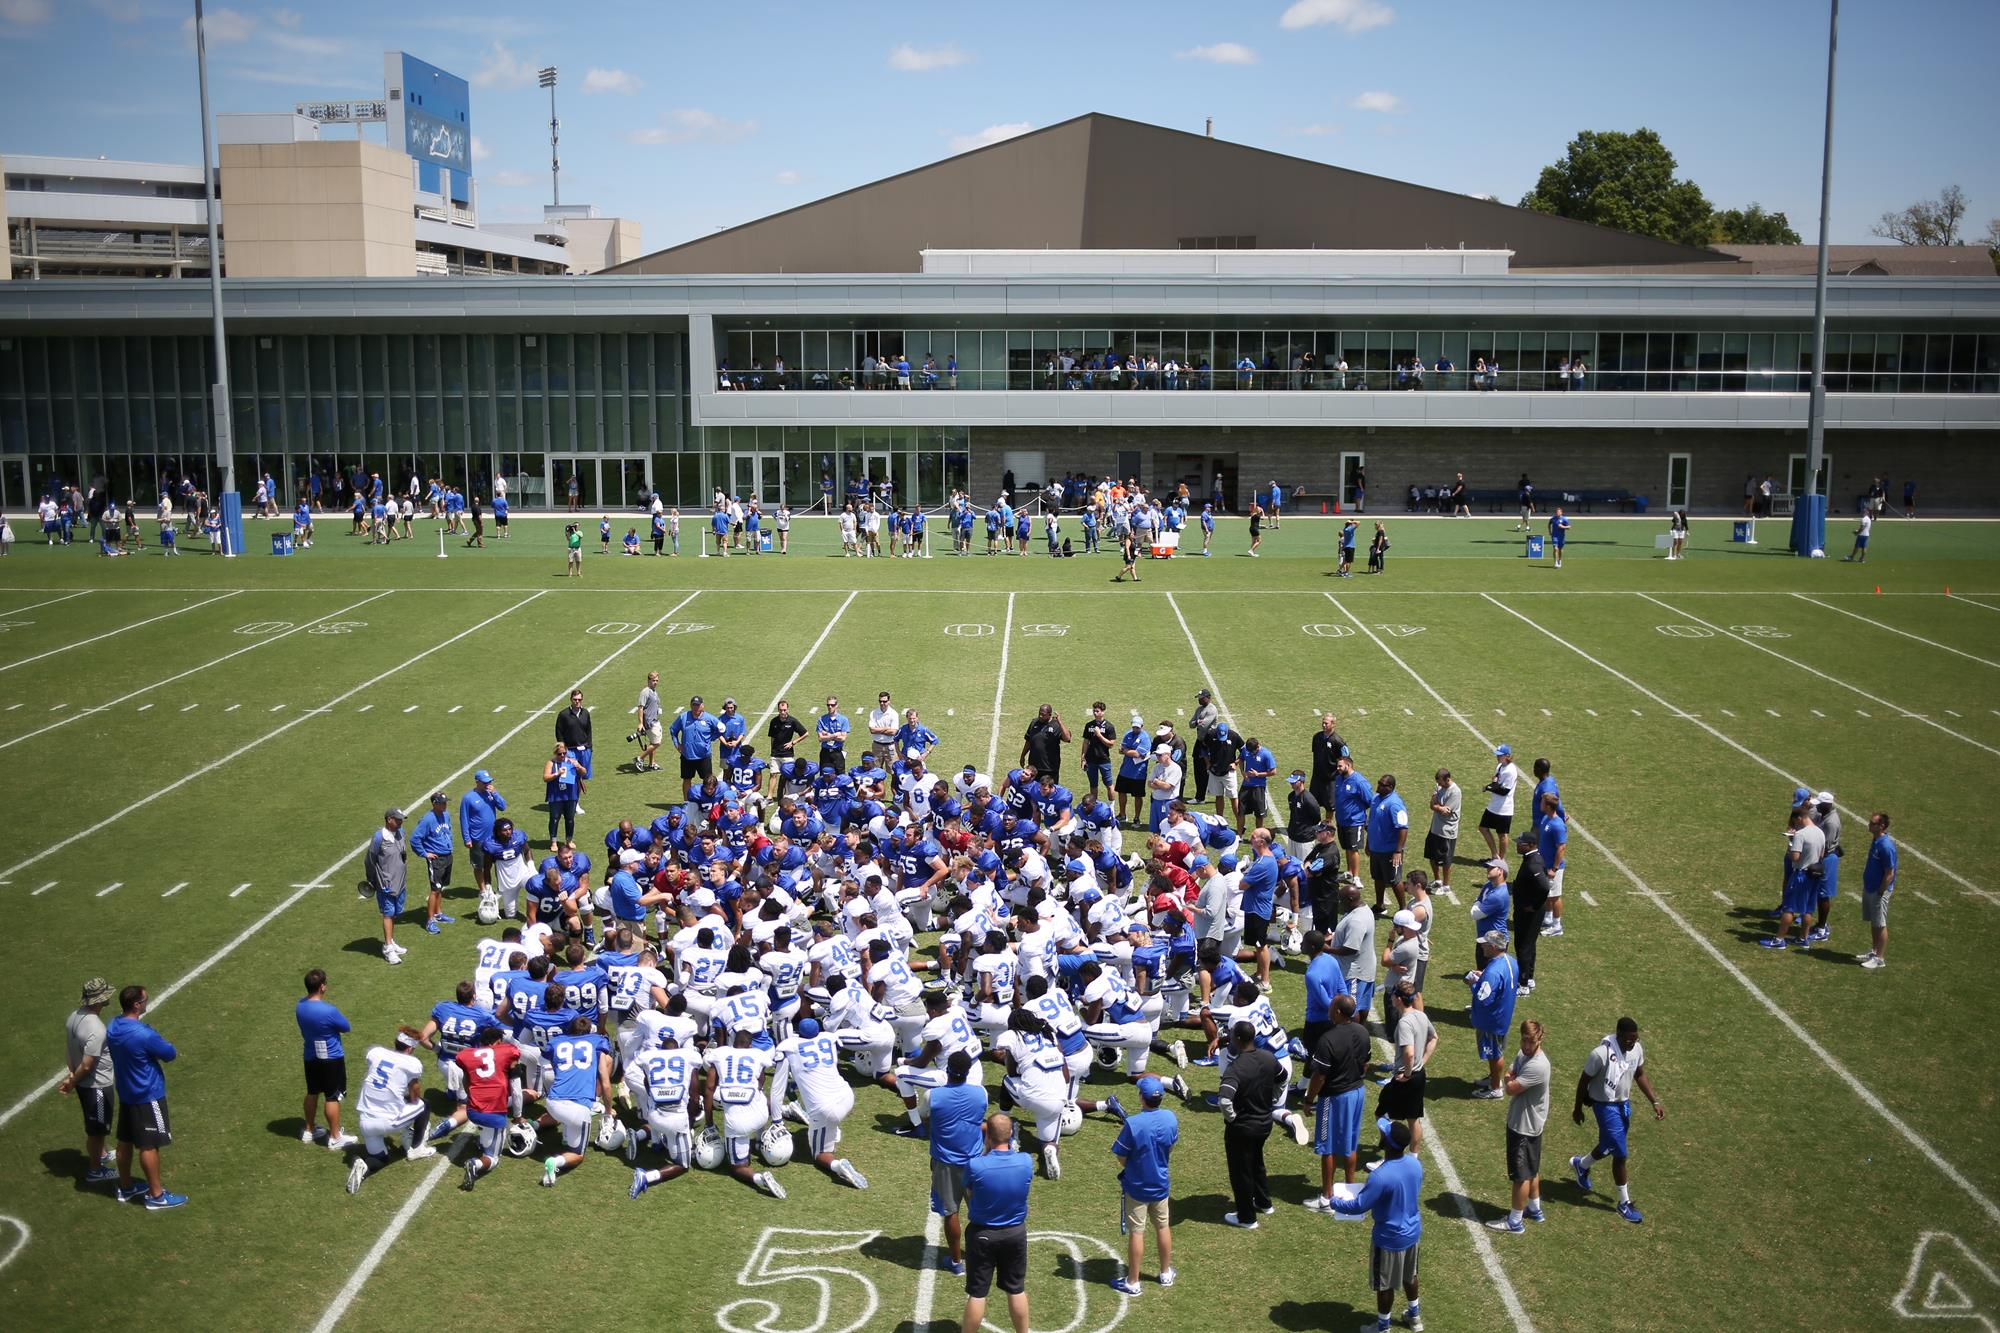 Cats ‘Couldn’t Ask for a Better Day’ on Fan Day